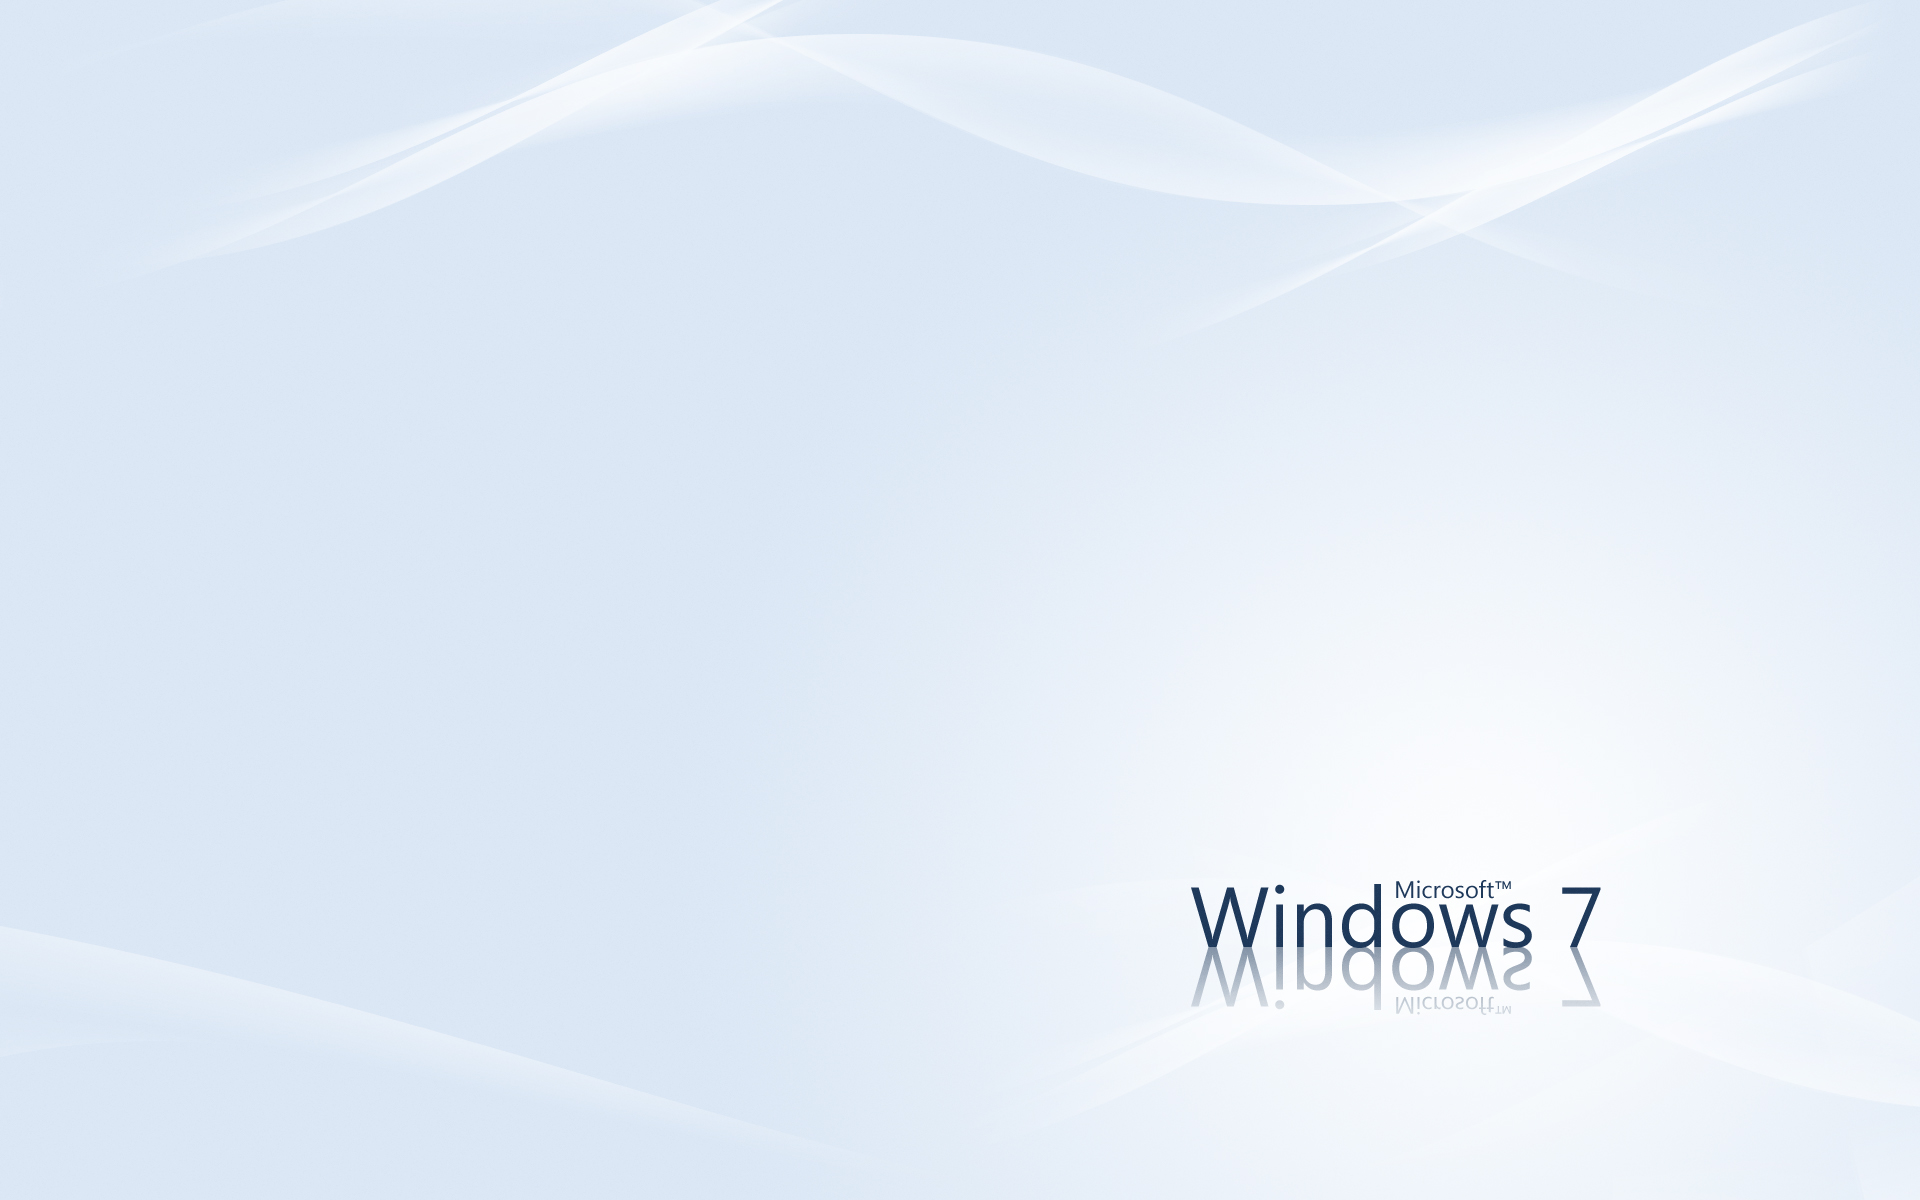 Windows 7 ultimate collection of wallpapers.31.jpg